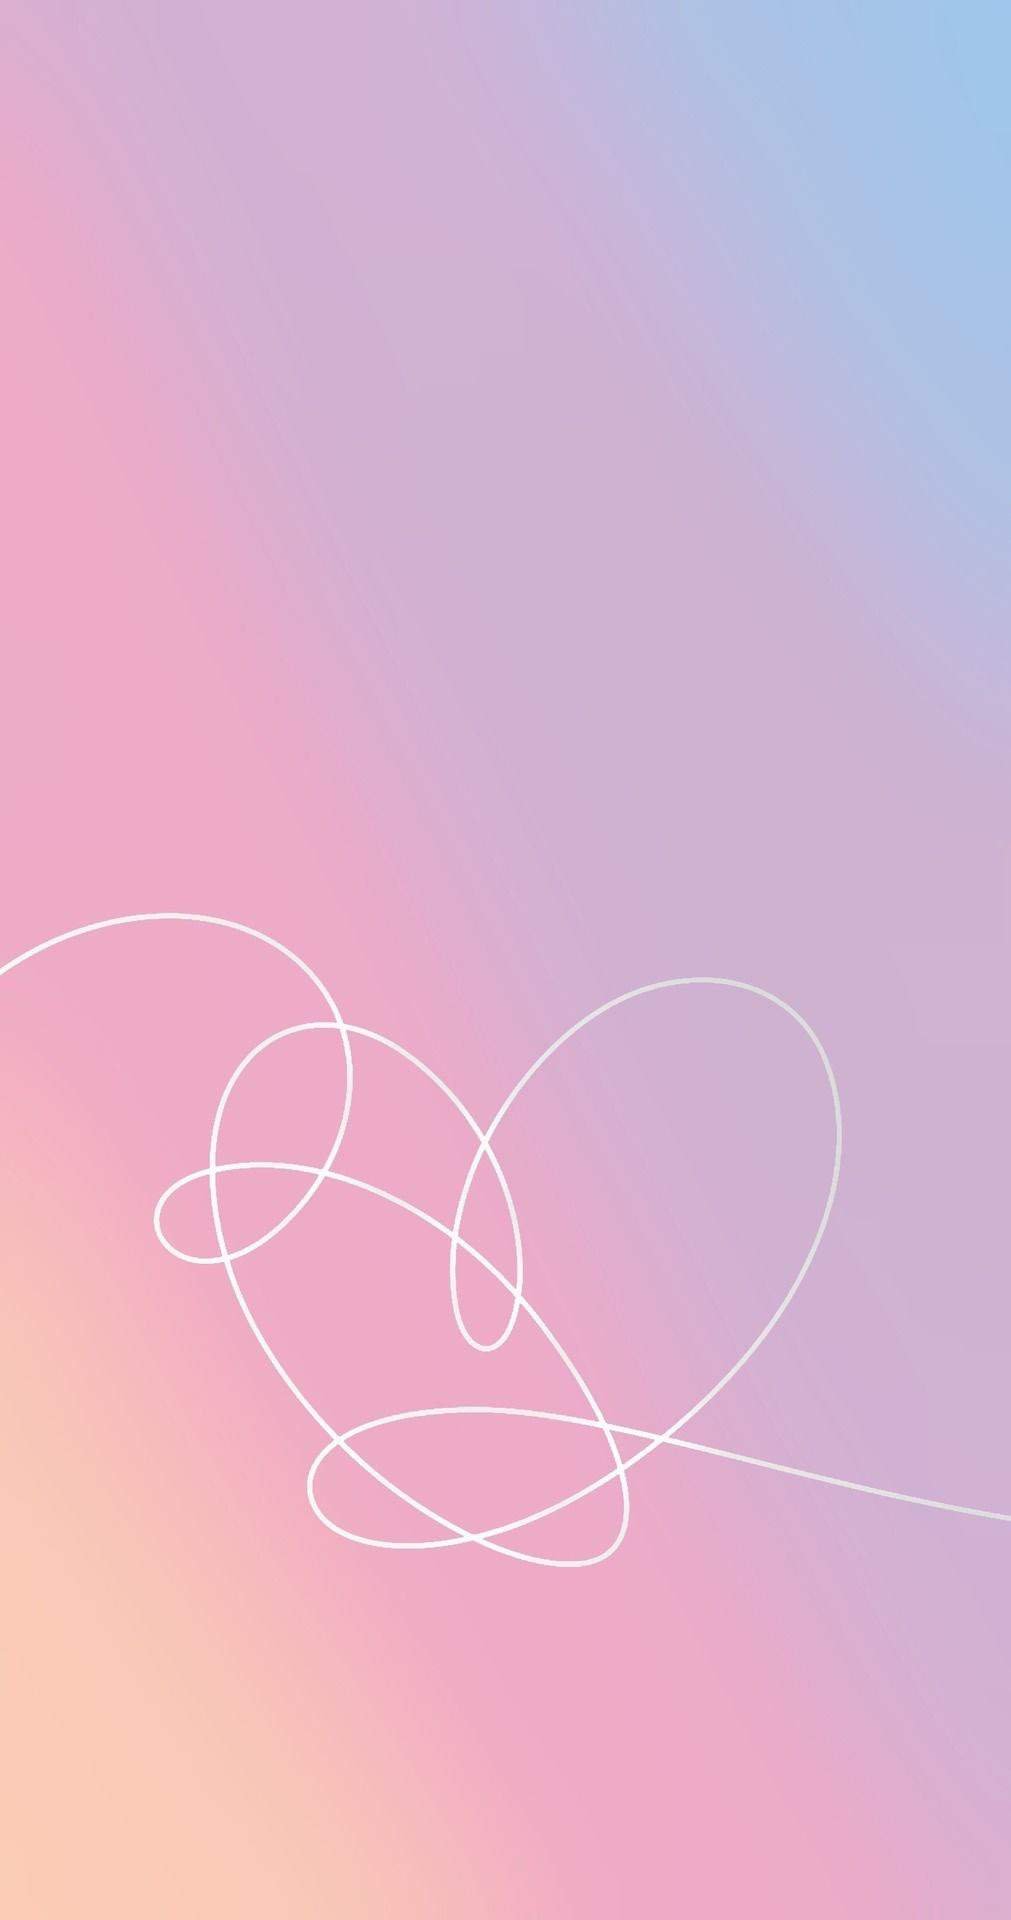 BTS Love Yourself abstract